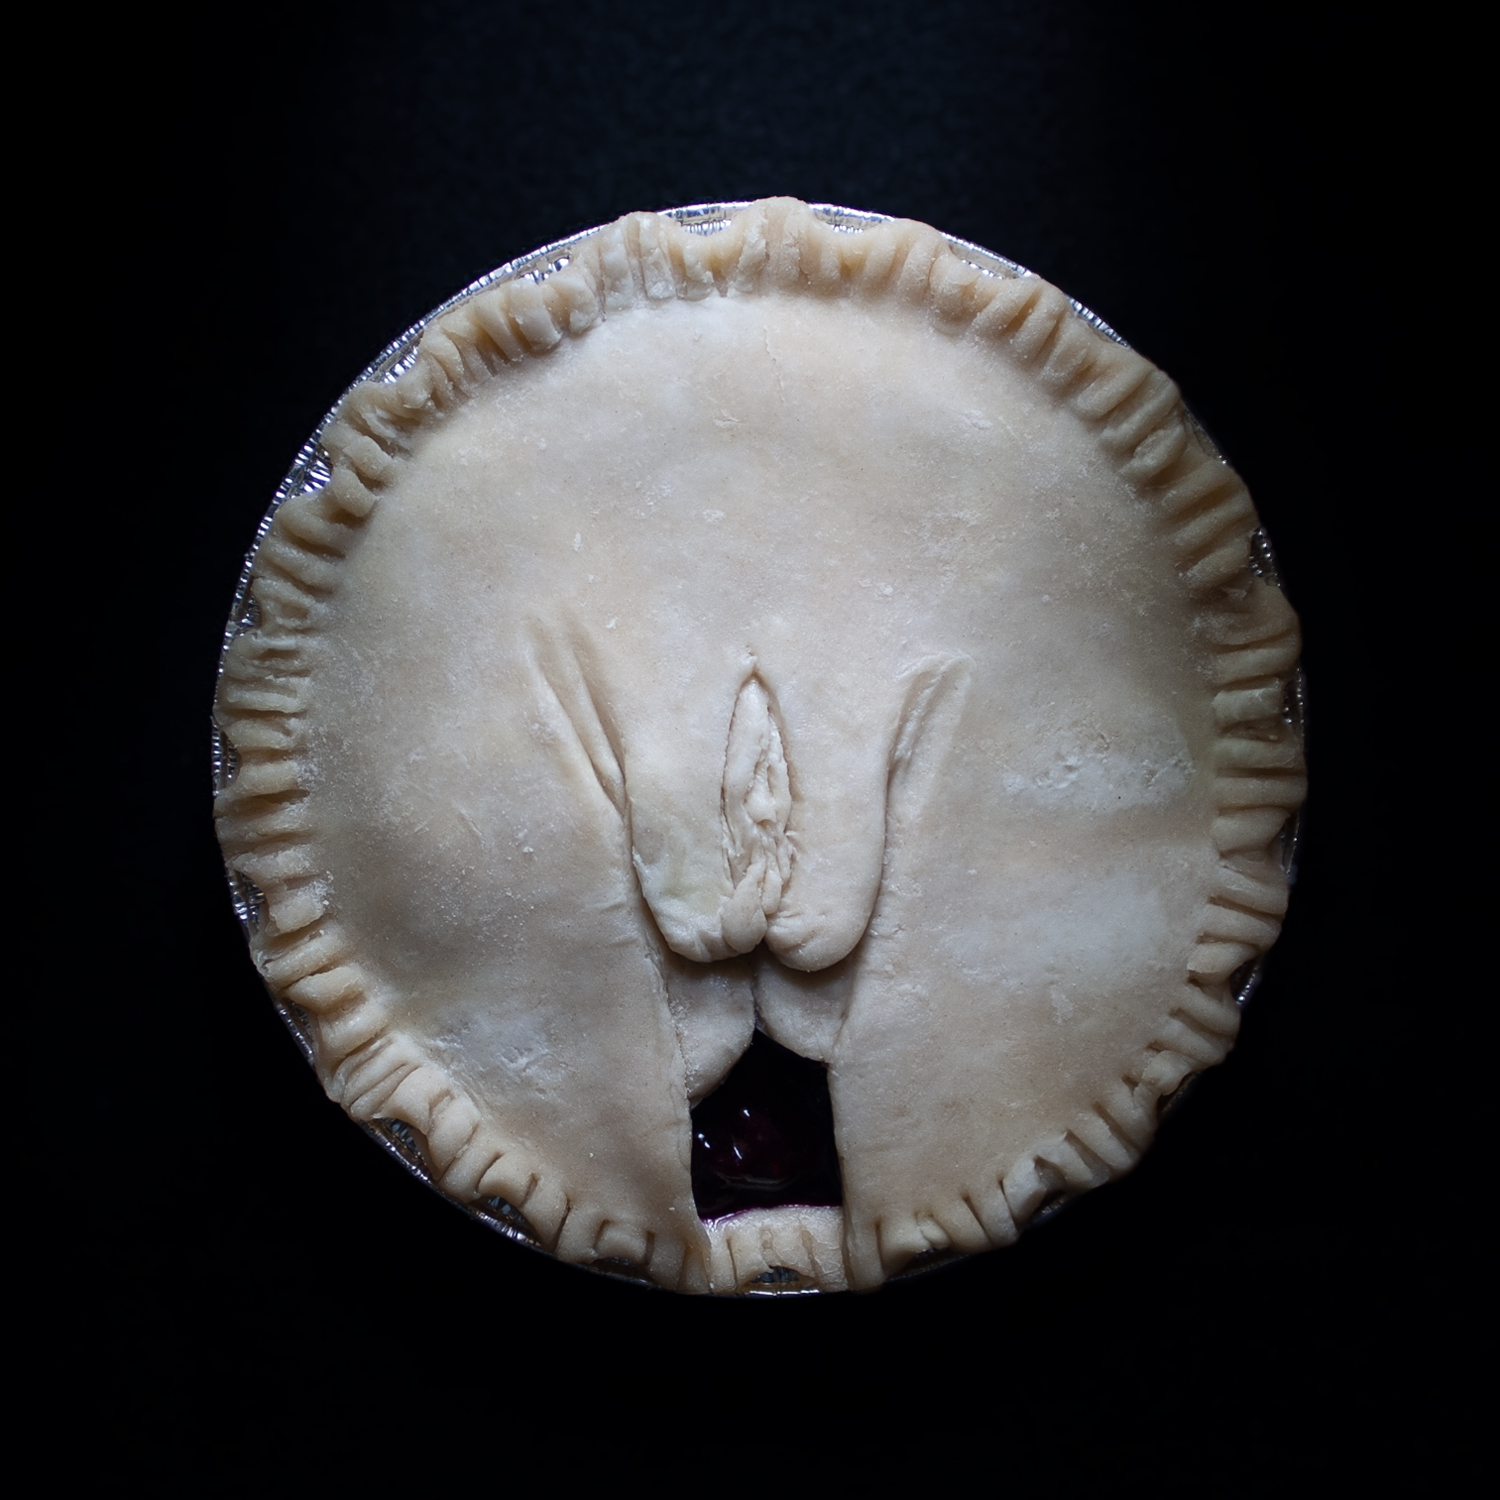 Pie 15, a pie sculpted to appear like a vulva